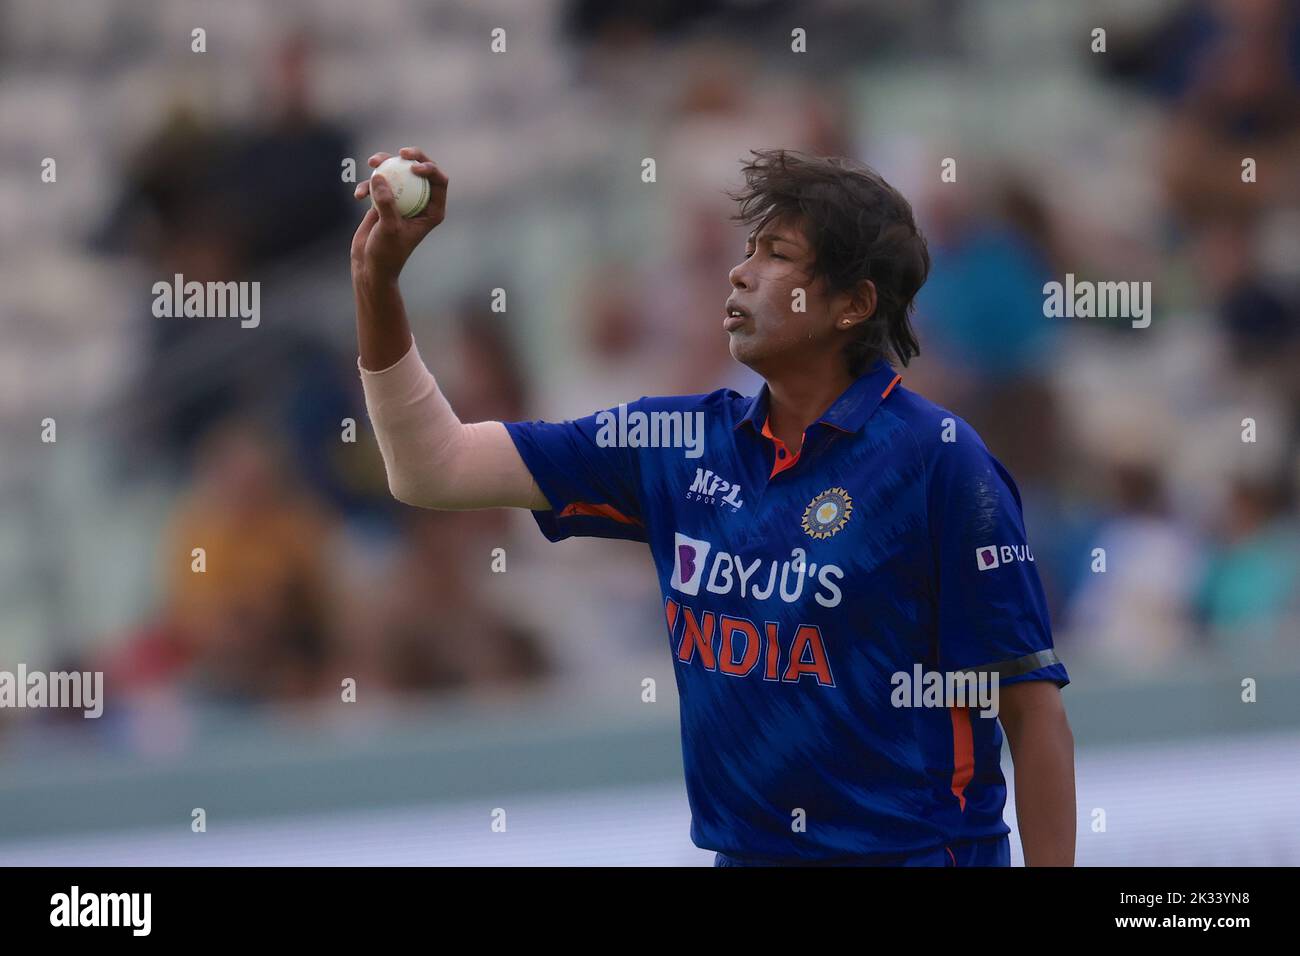 24 September , 2022, London, UK. India’s Jhulan Goswami bowling as England women take on India in the 3rd Royal London One Day International at Lords. David Rowe/Alamy Live News. Stock Photo